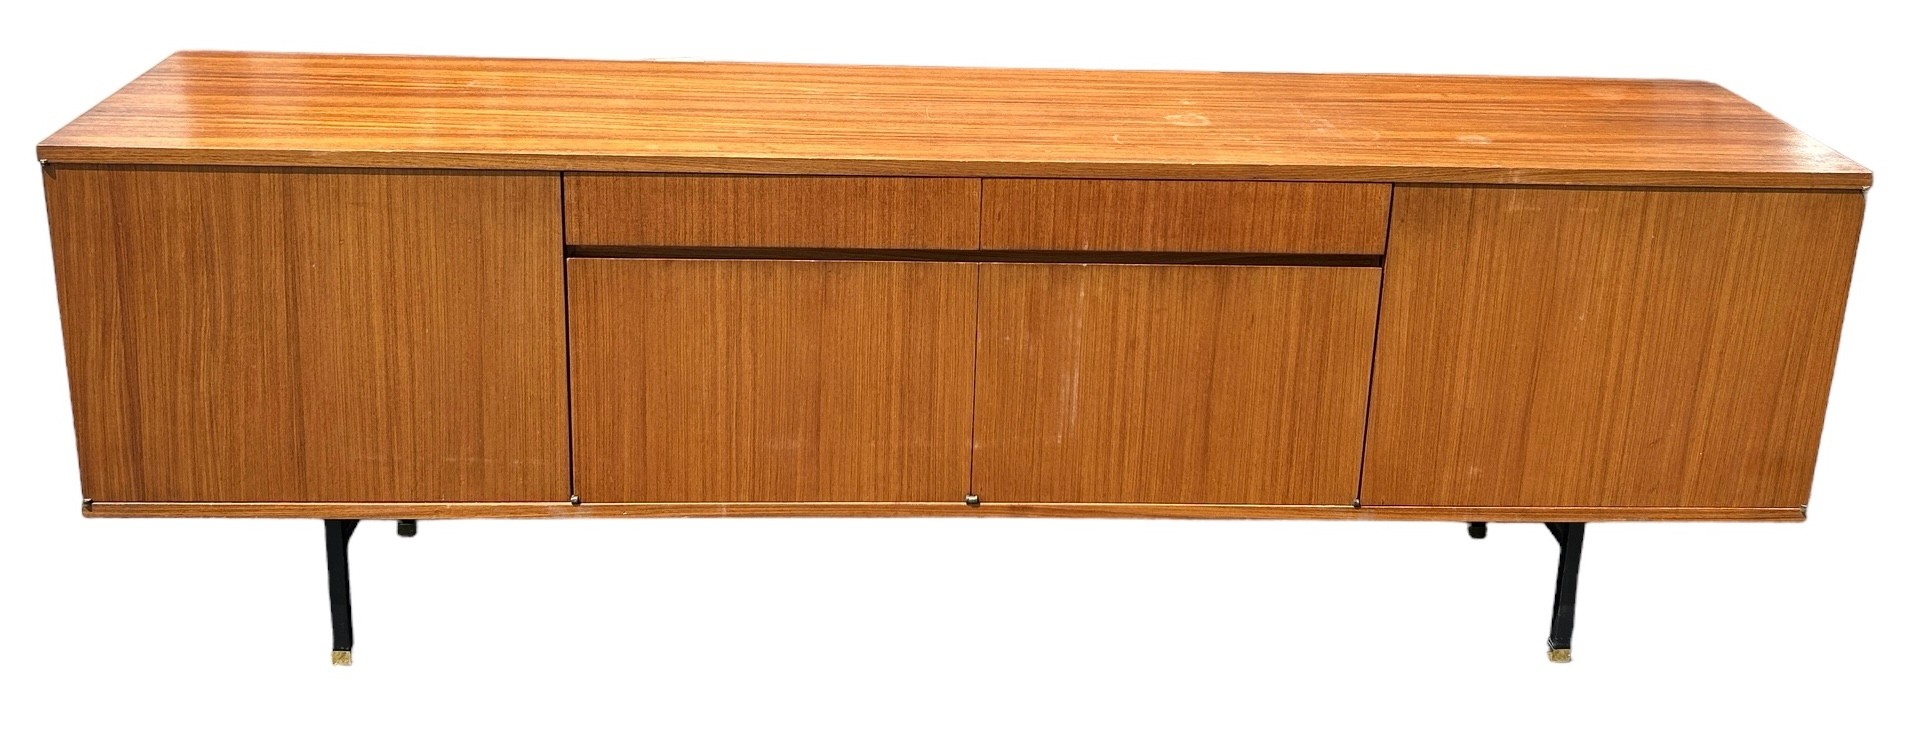 A MID CENTURY TEAK SIDEBOARD, four opening compartments and two central drawers. The compartments